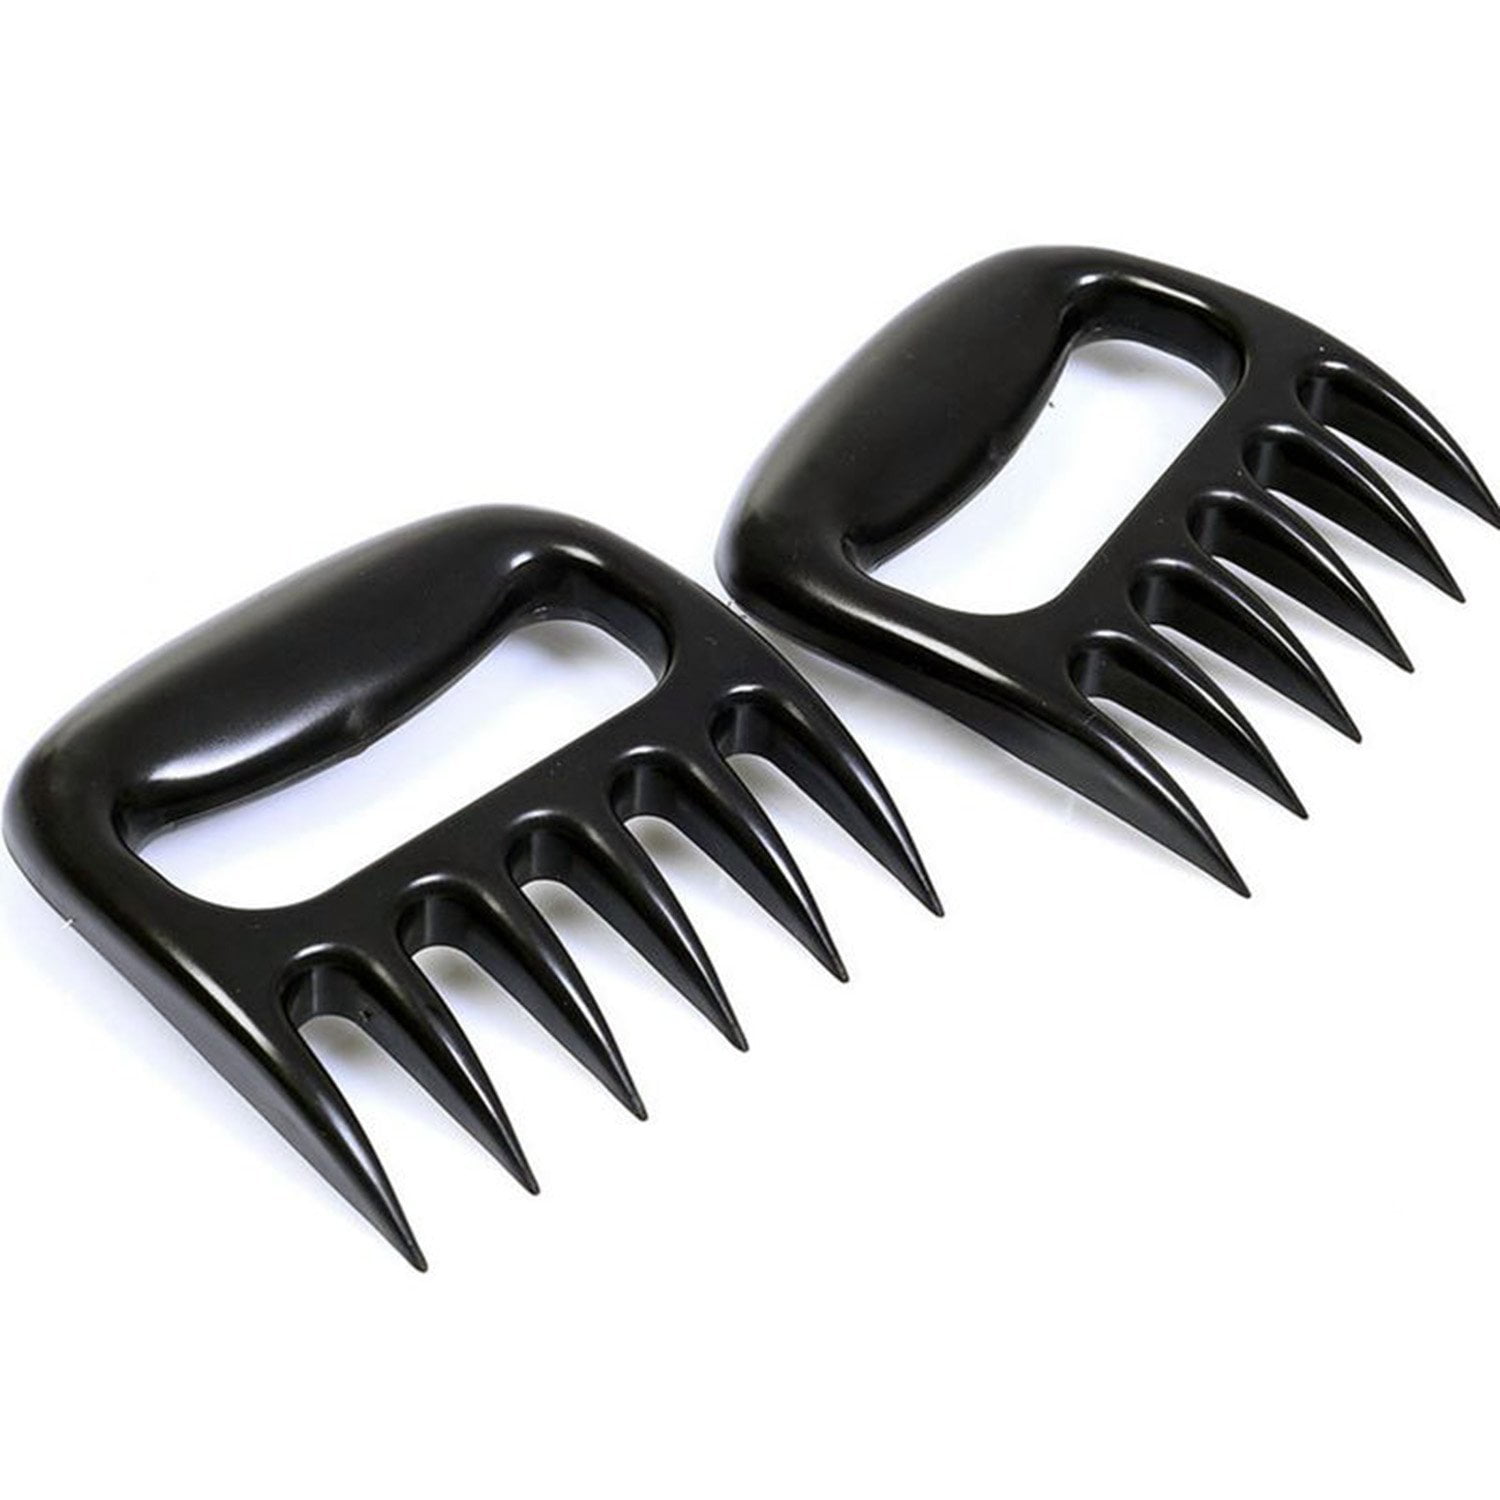 BBQ Meat Claws Pulled Pork Shredder Bear Paw Carving Forks Grill Accessories New 